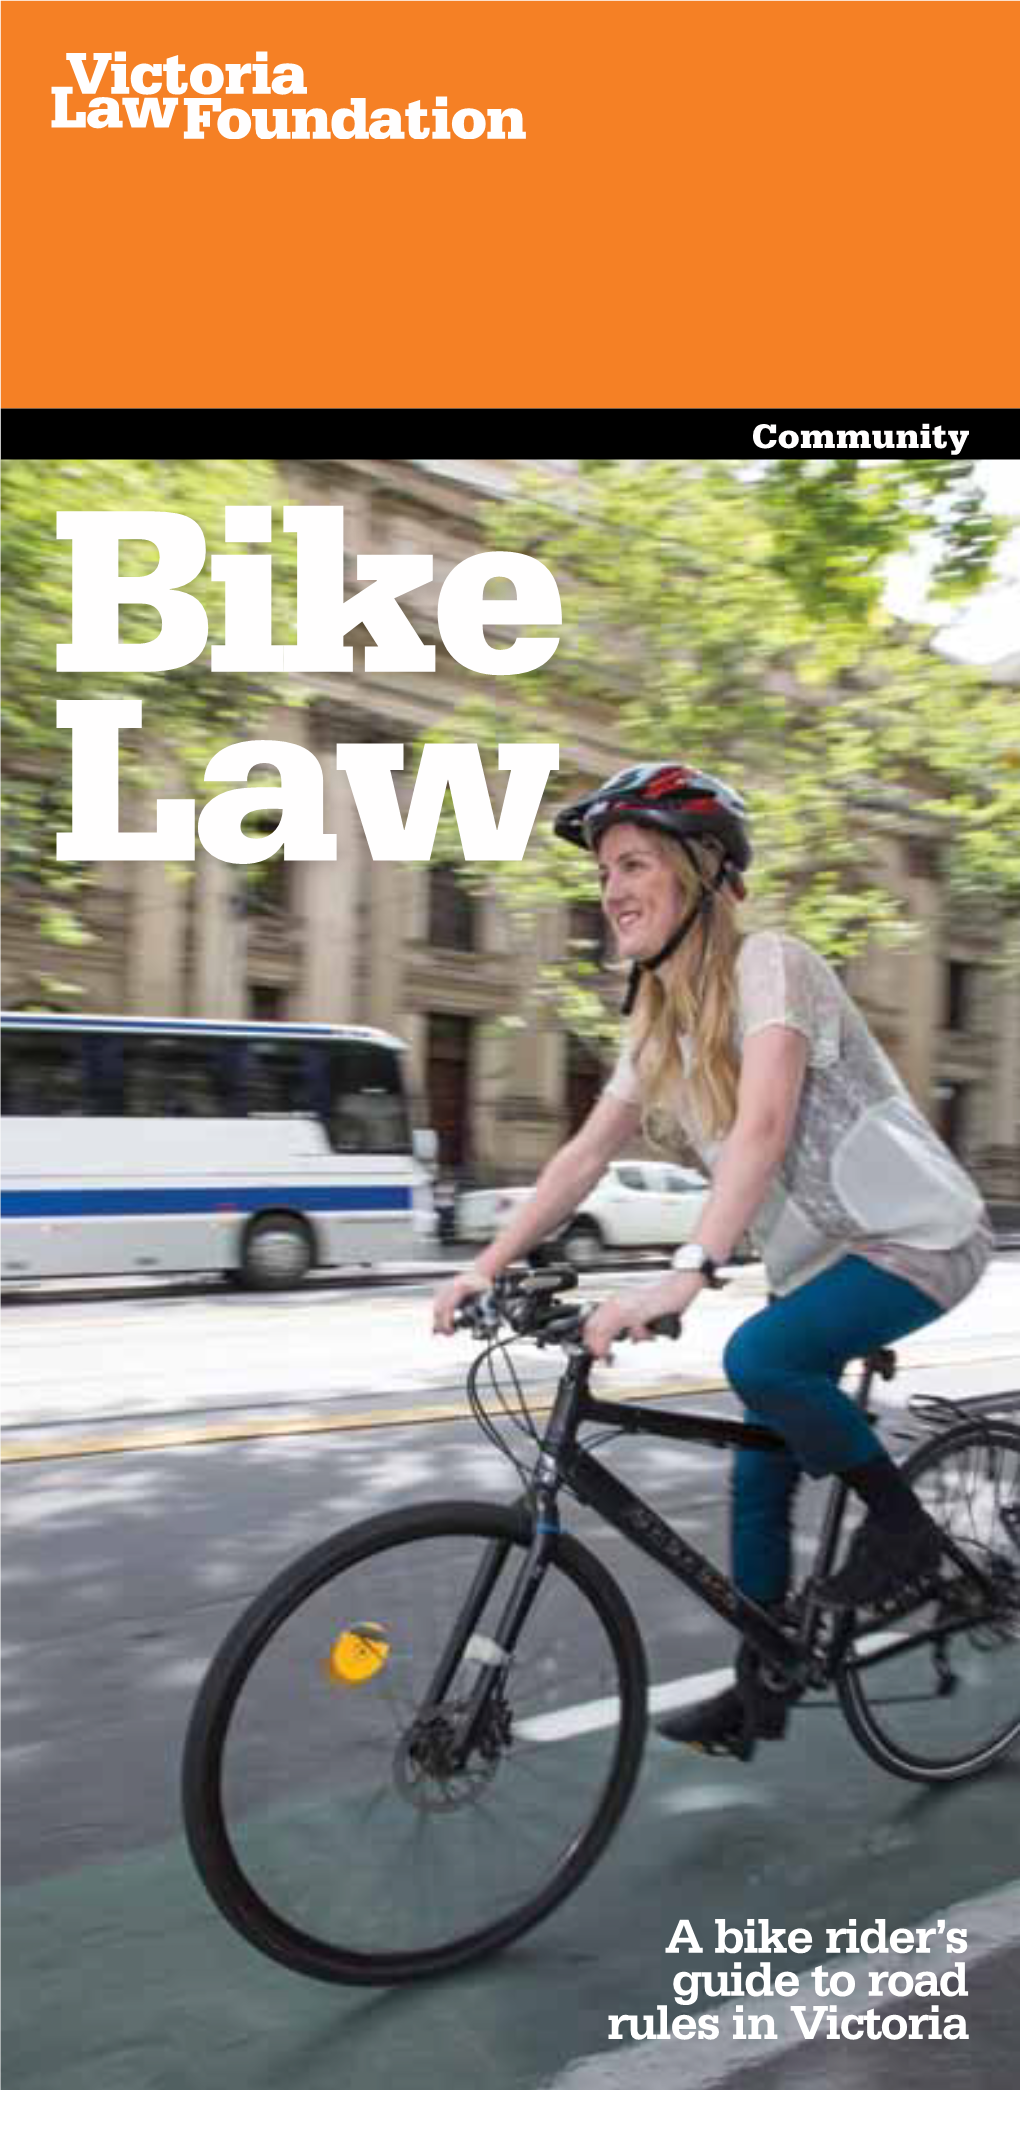 A Bike Rider's Guide to Road Rules in Victoria